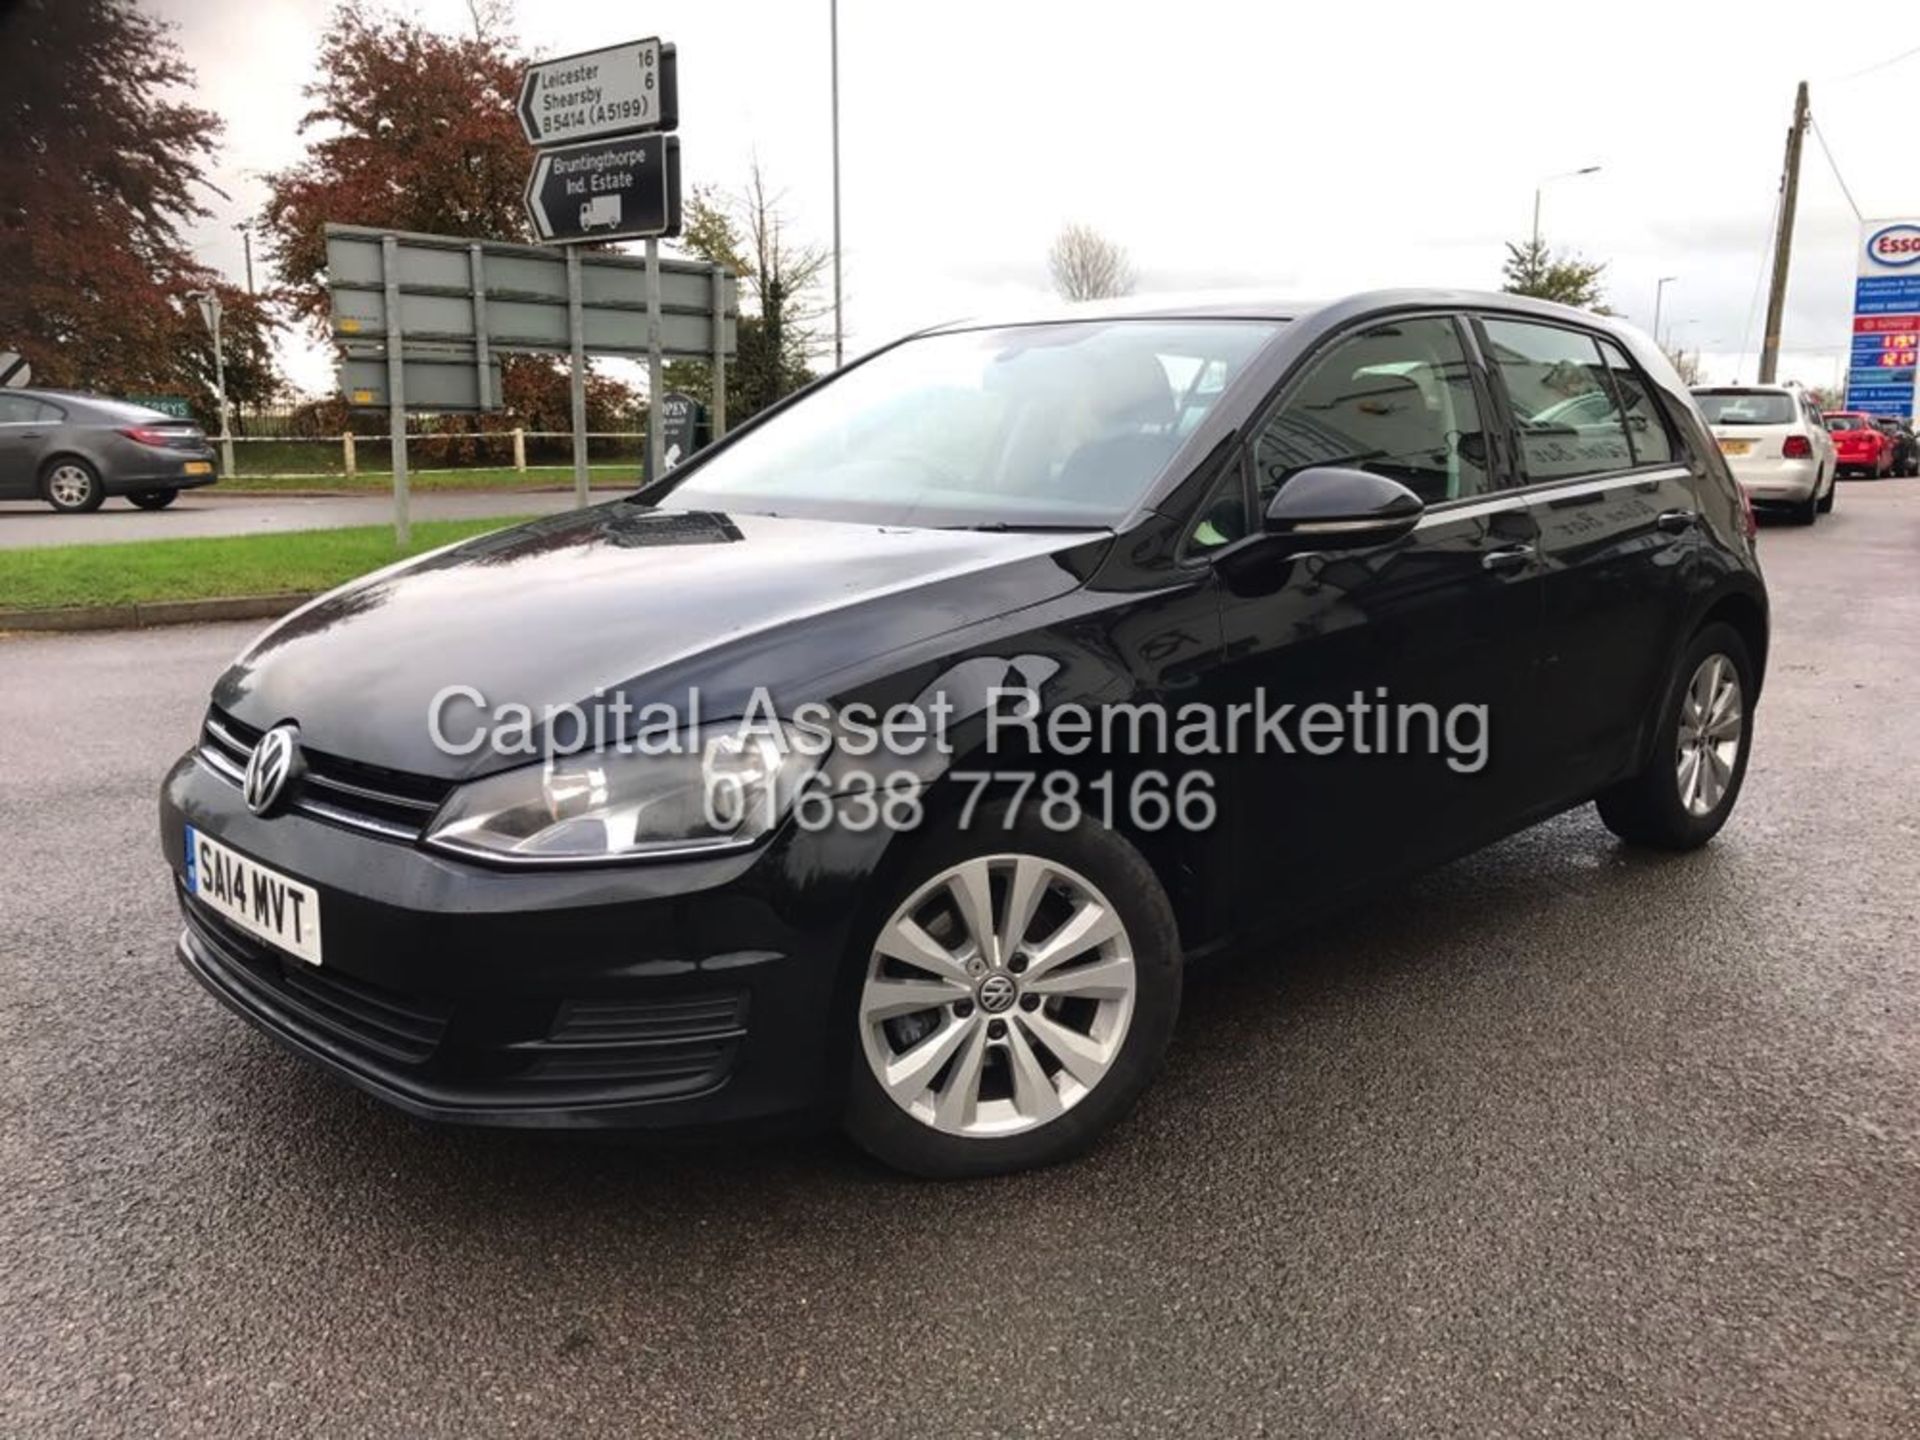 (ON SALE) VOLKSWAGEN GOLF 1.6TDI 7 SPEED DSG "SPECIAL EQUIPMENT" AIR CON - STOP/START-ELECTRIC PACK